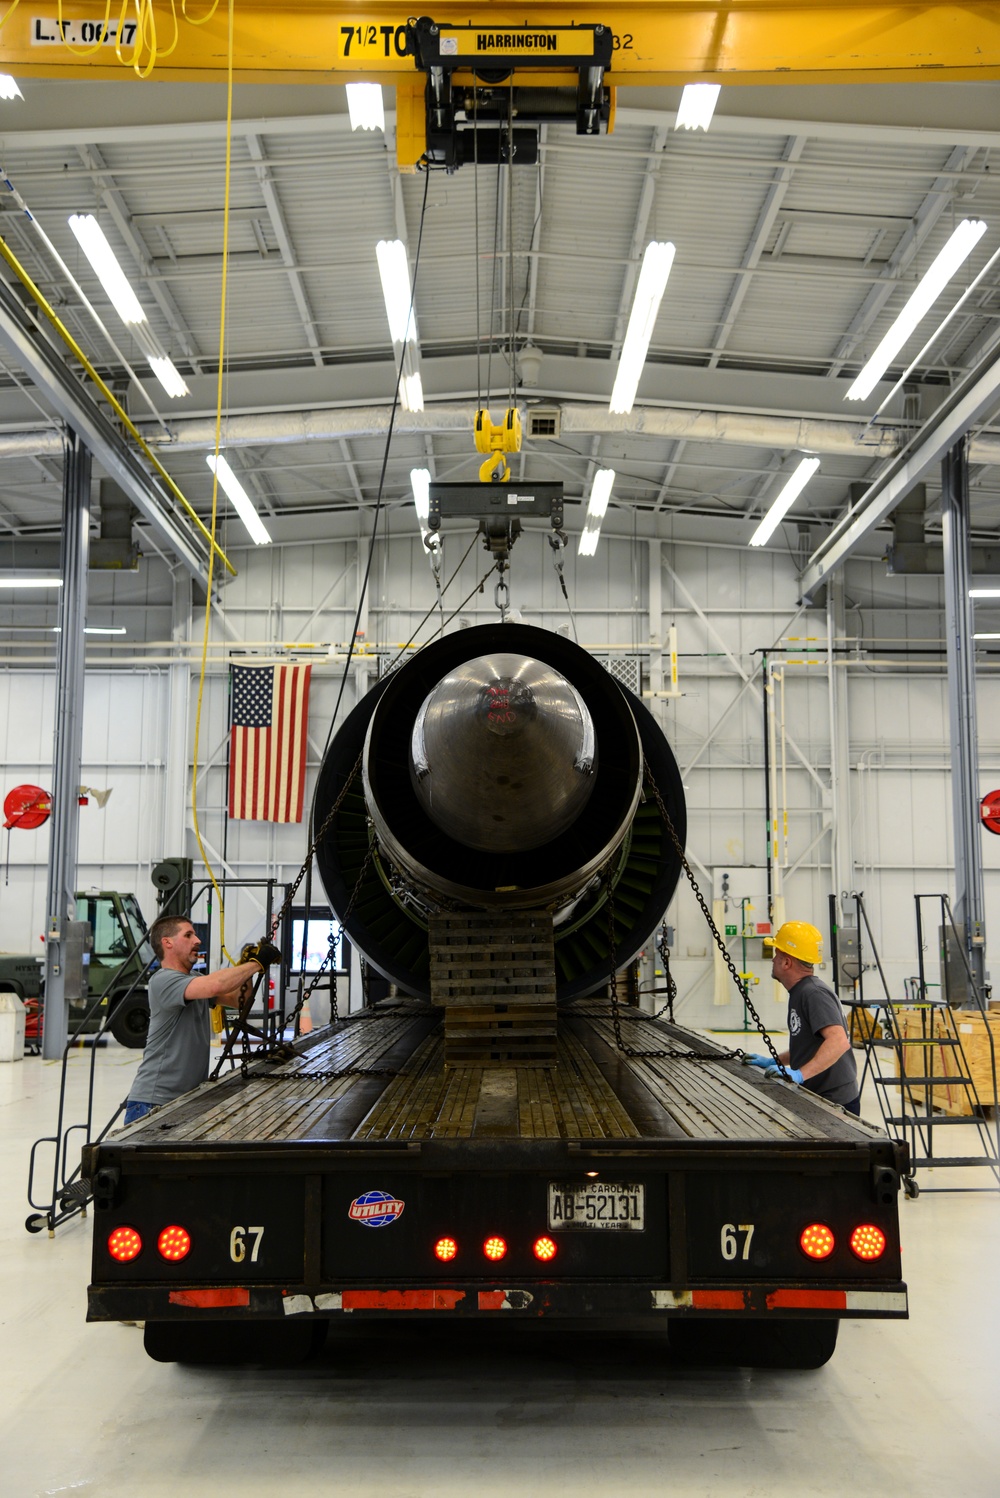 End of an era: Air Force, Team Dover say goodbye to last TF-39 engine